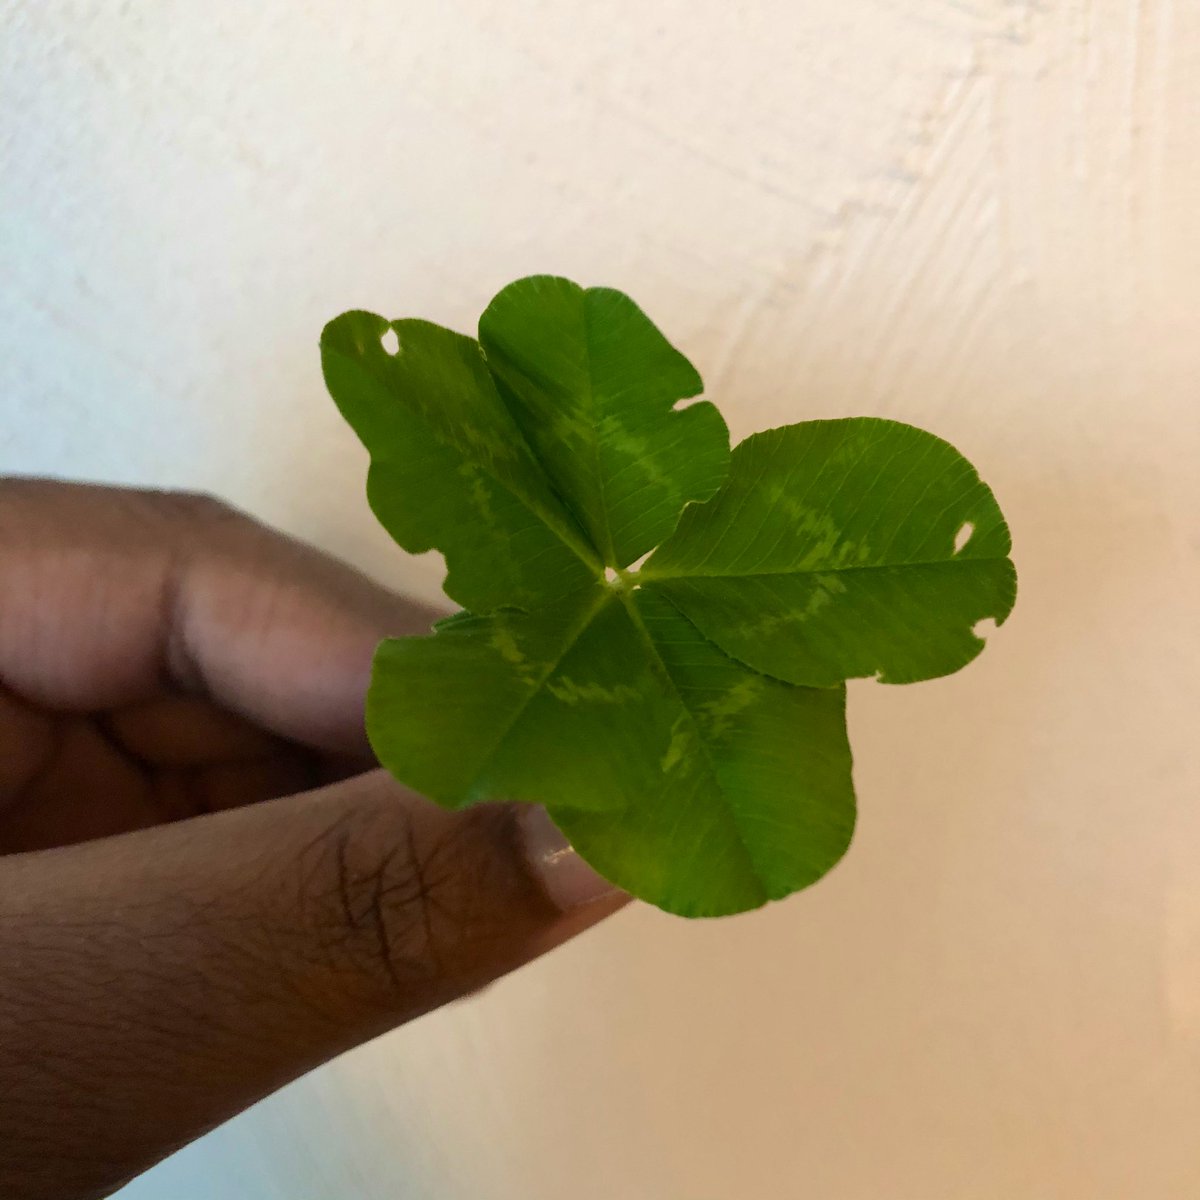 YOU WILL NOT BELIEVE THIS:I found a FIVE leaf clover!!!It looks like perhaps a two three leaf clovers grew too close to each other and then fused. But there are five leaves on this stem!!!